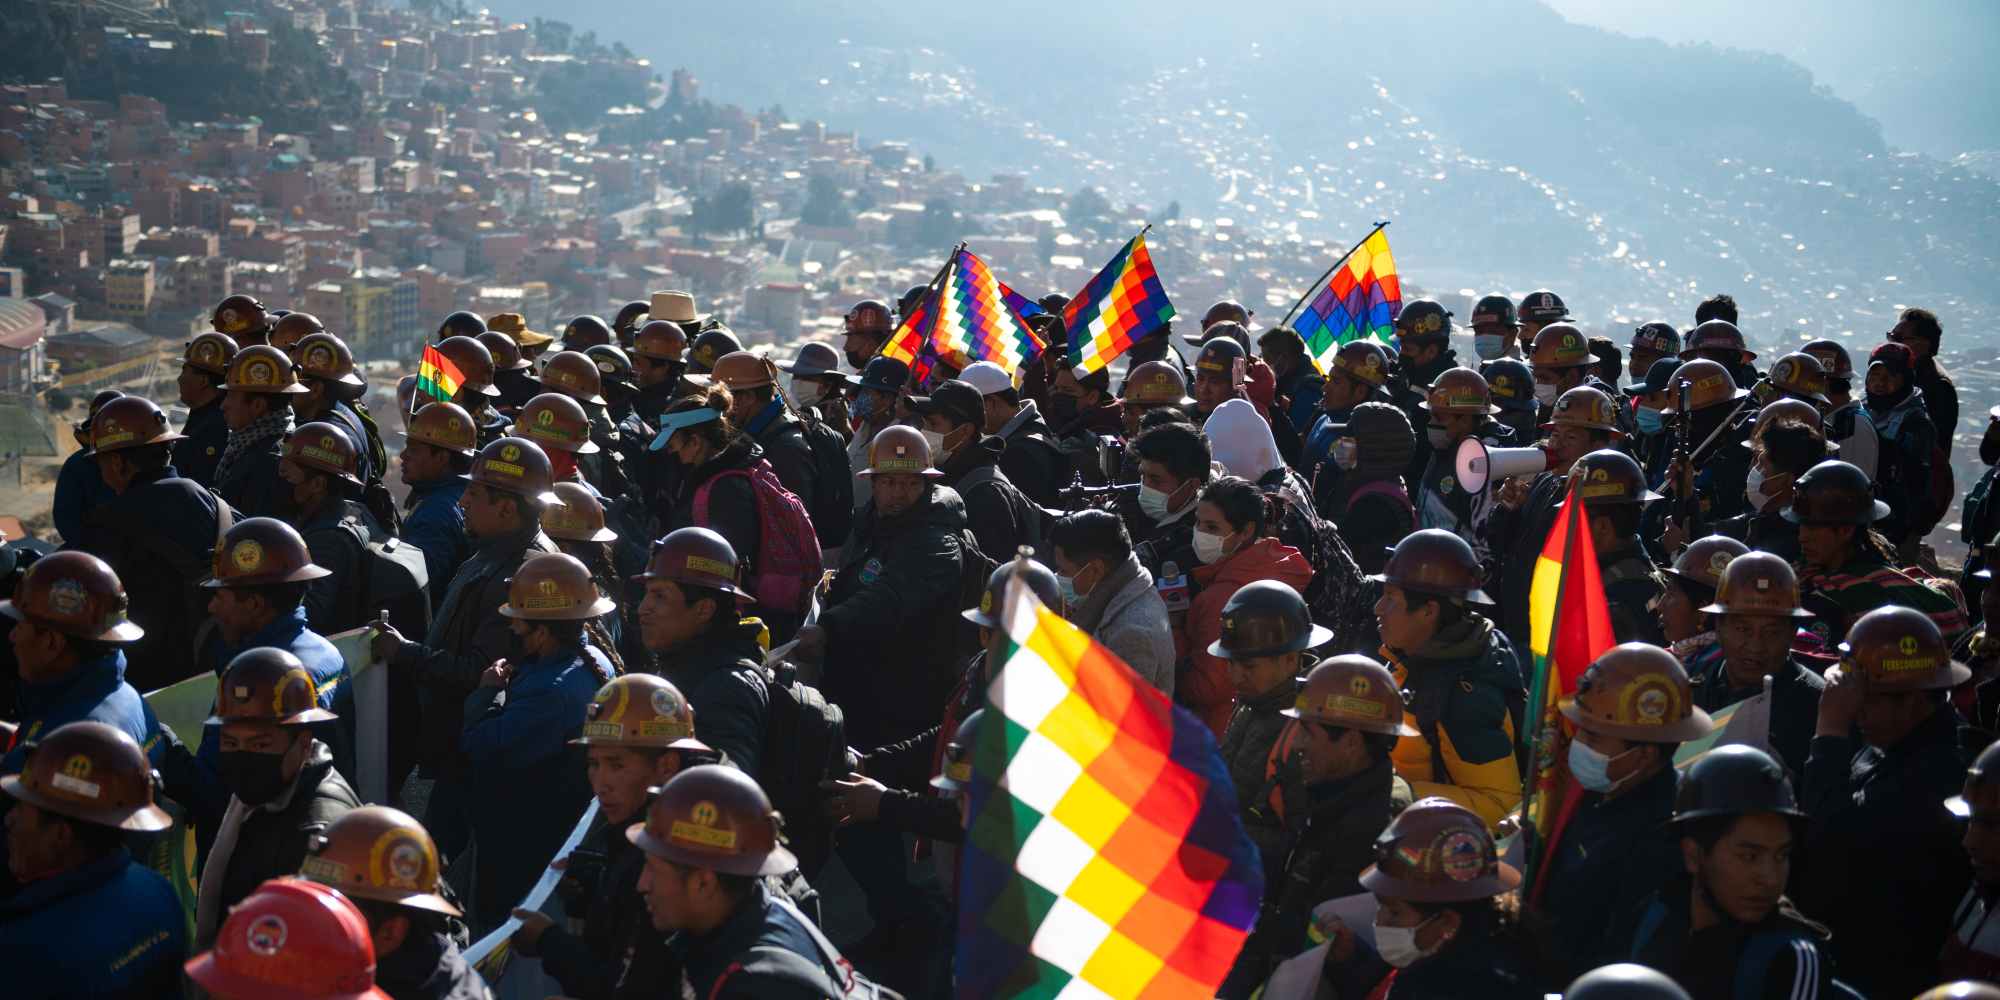 25 August 2022, Bolivia, La Paz: Supporters of President Arce's government march with flags and mining helmets during a rally in support of the government. "We are starting this big rallyfor the country and democracy," the Bolivian leader wrote on Twitter. Arce had called for the rally. He said it was intended to send a signal against the "right-wing coup plotters." Photo: Radoslaw Czajkowski/dpa (Photo by Radoslaw Czajkowski/picture alliance via Getty Images)